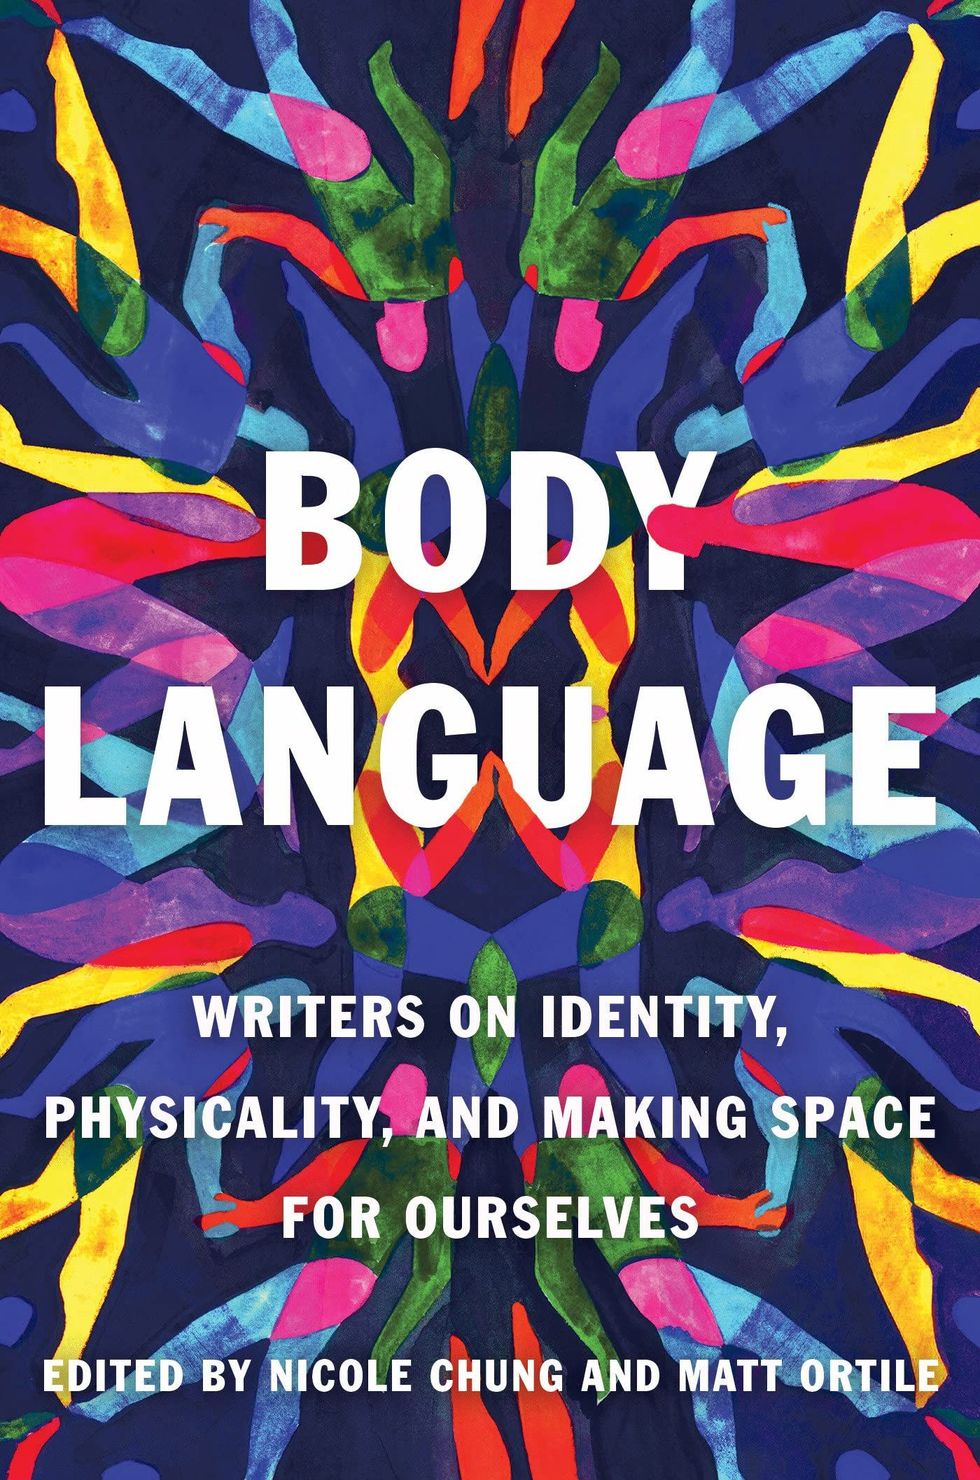 Body Language: Writers on Identity, Physicality, and Making Space for Ourselves